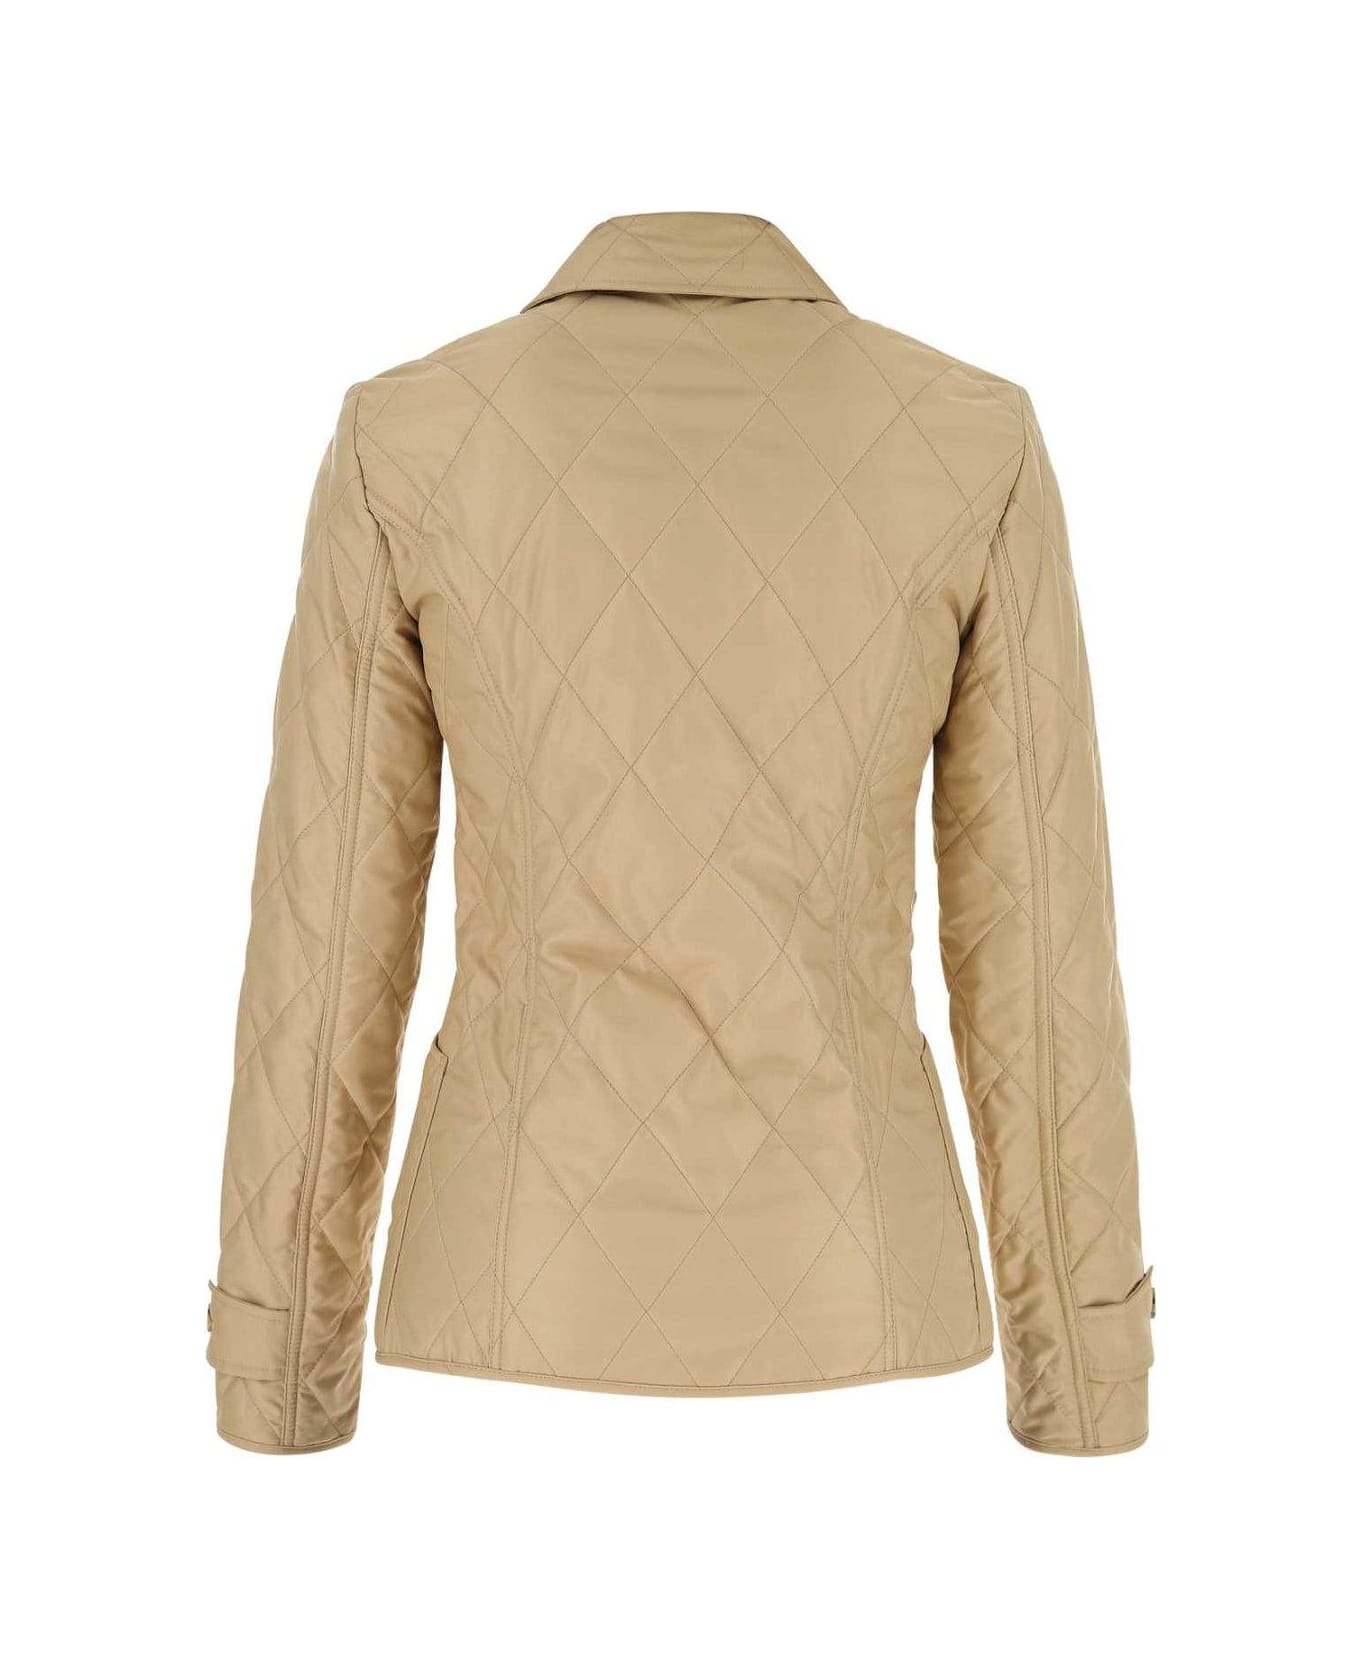 Burberry Quilted Thermoregulated Jacket - NEUTRALS